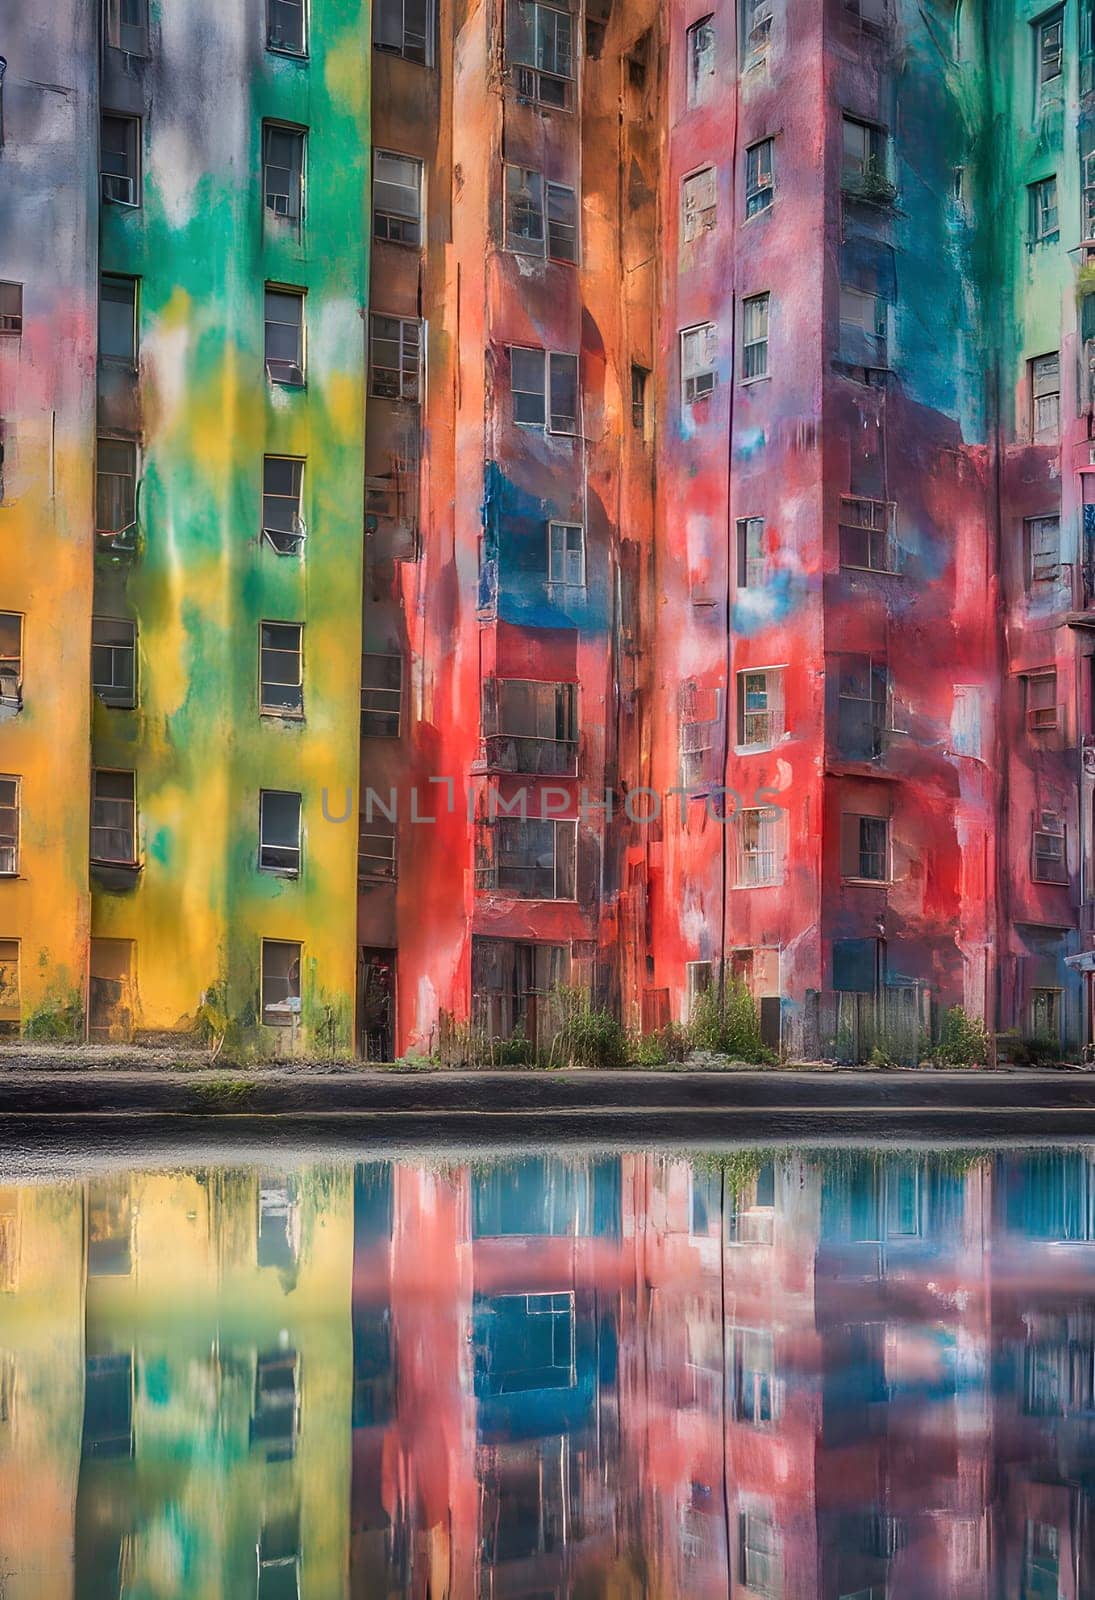 The image shows a series of colorful buildings in an urban setting. Buildings are reflected in the water. dripping paint art. by rostik924